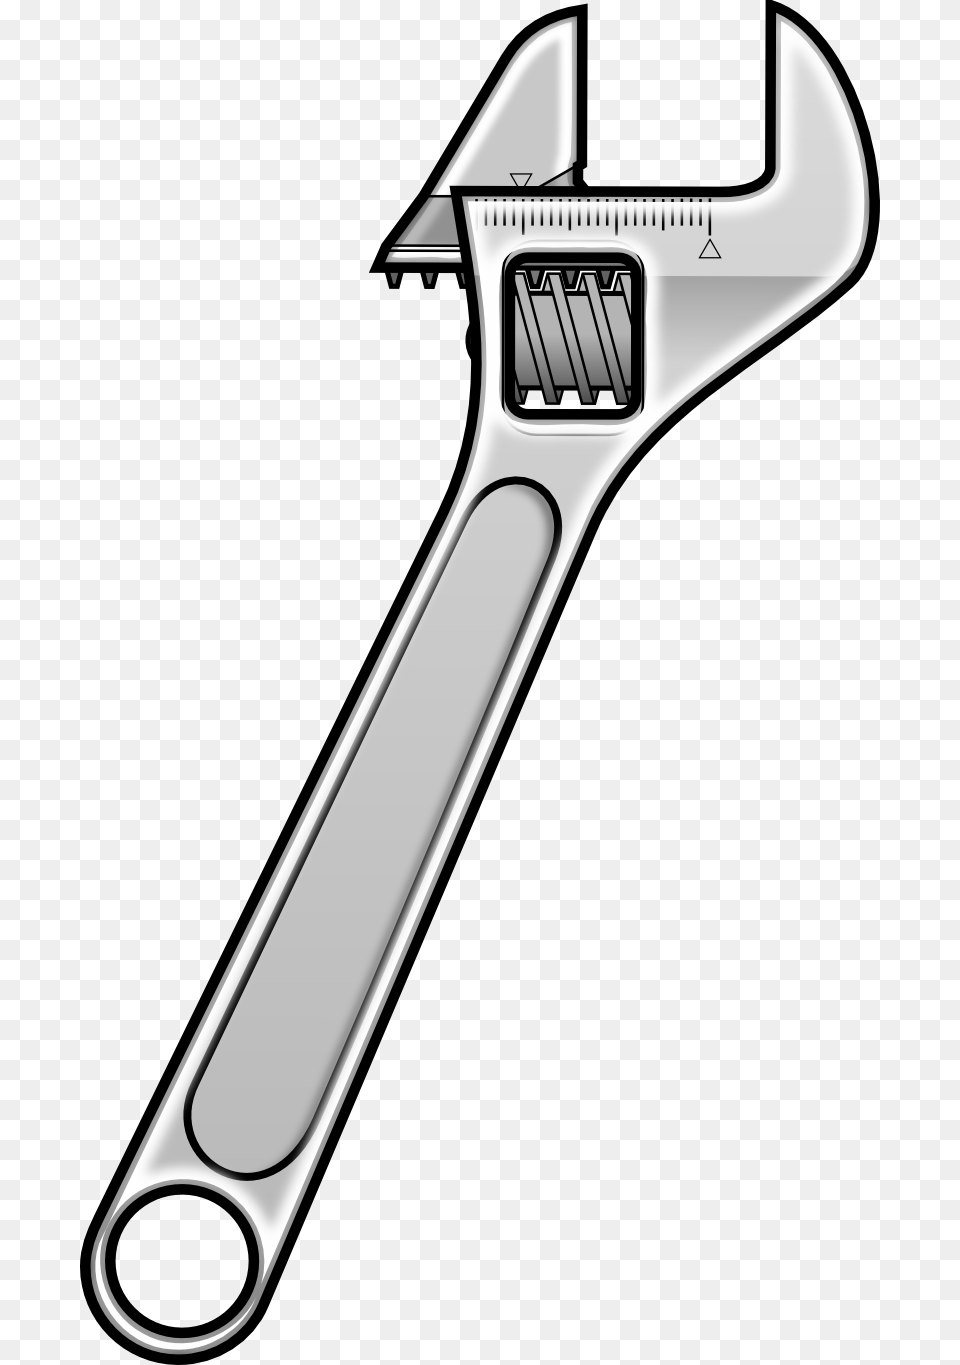 Pix For U0026gt Wrench Clipart Wrench, Blade, Razor, Weapon Free Transparent Png